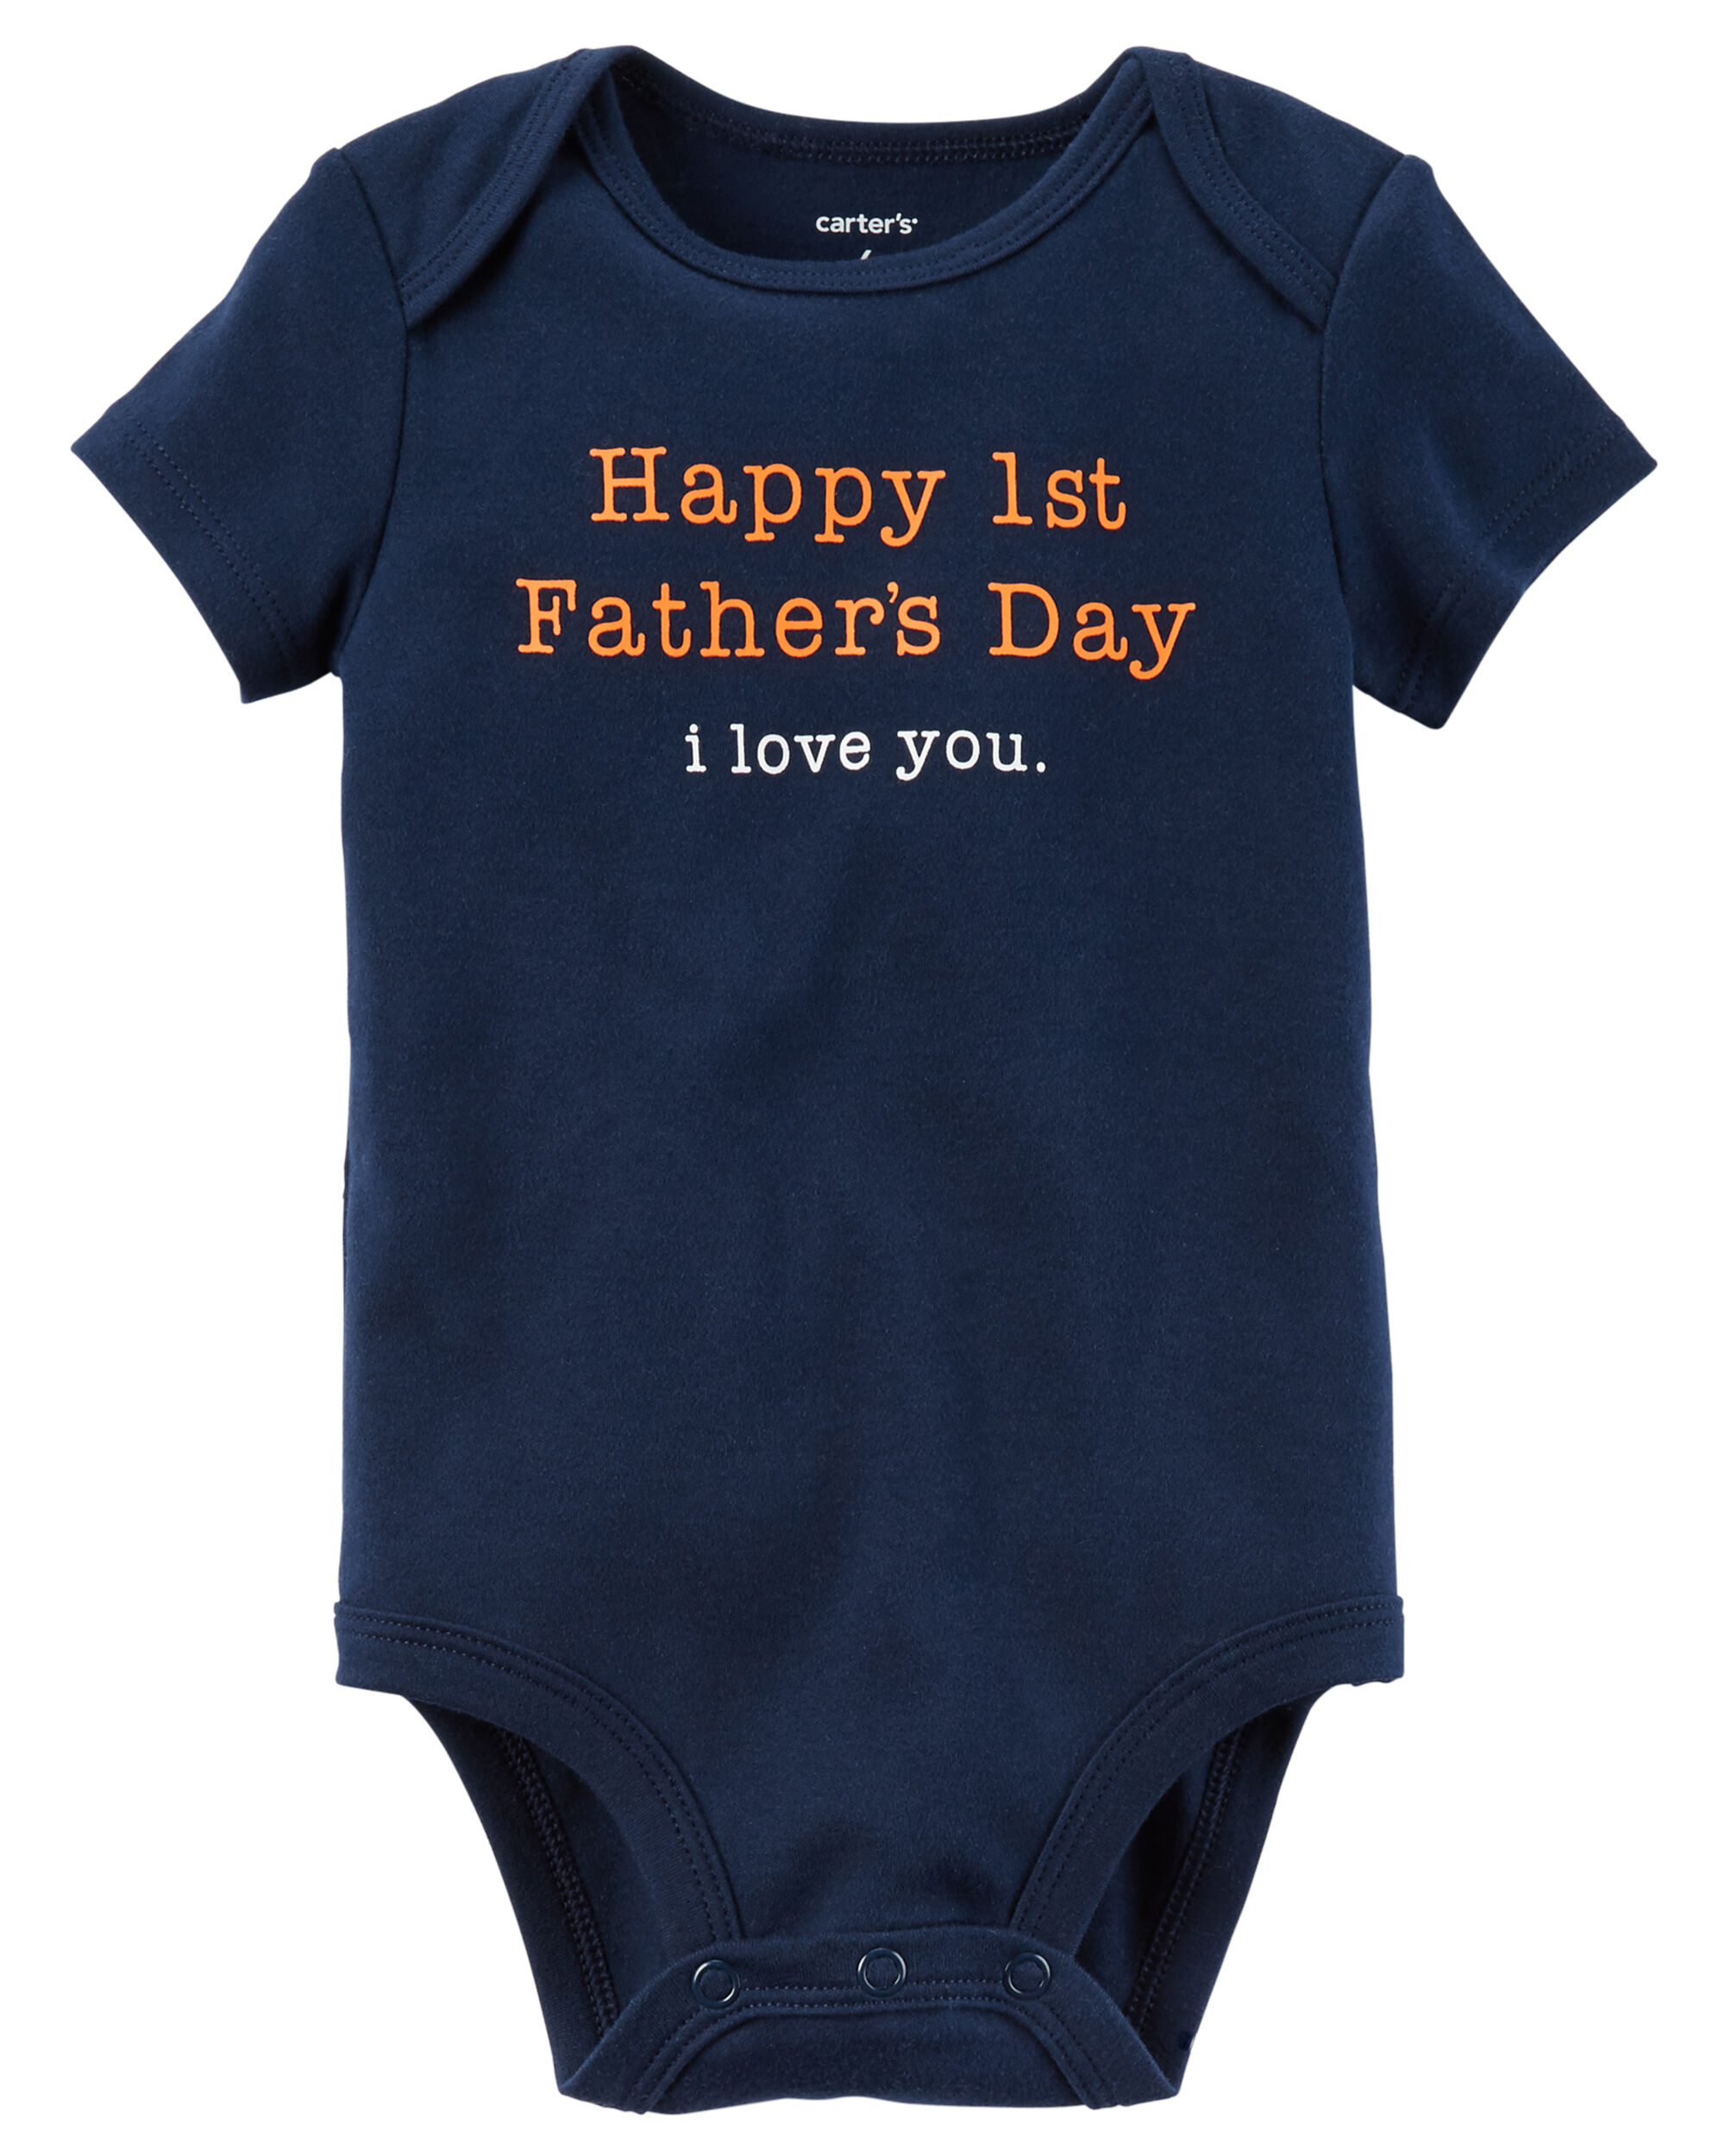 Dad Thanks for The Good Looks Happy Father's Day Baby Bodysuit Gift